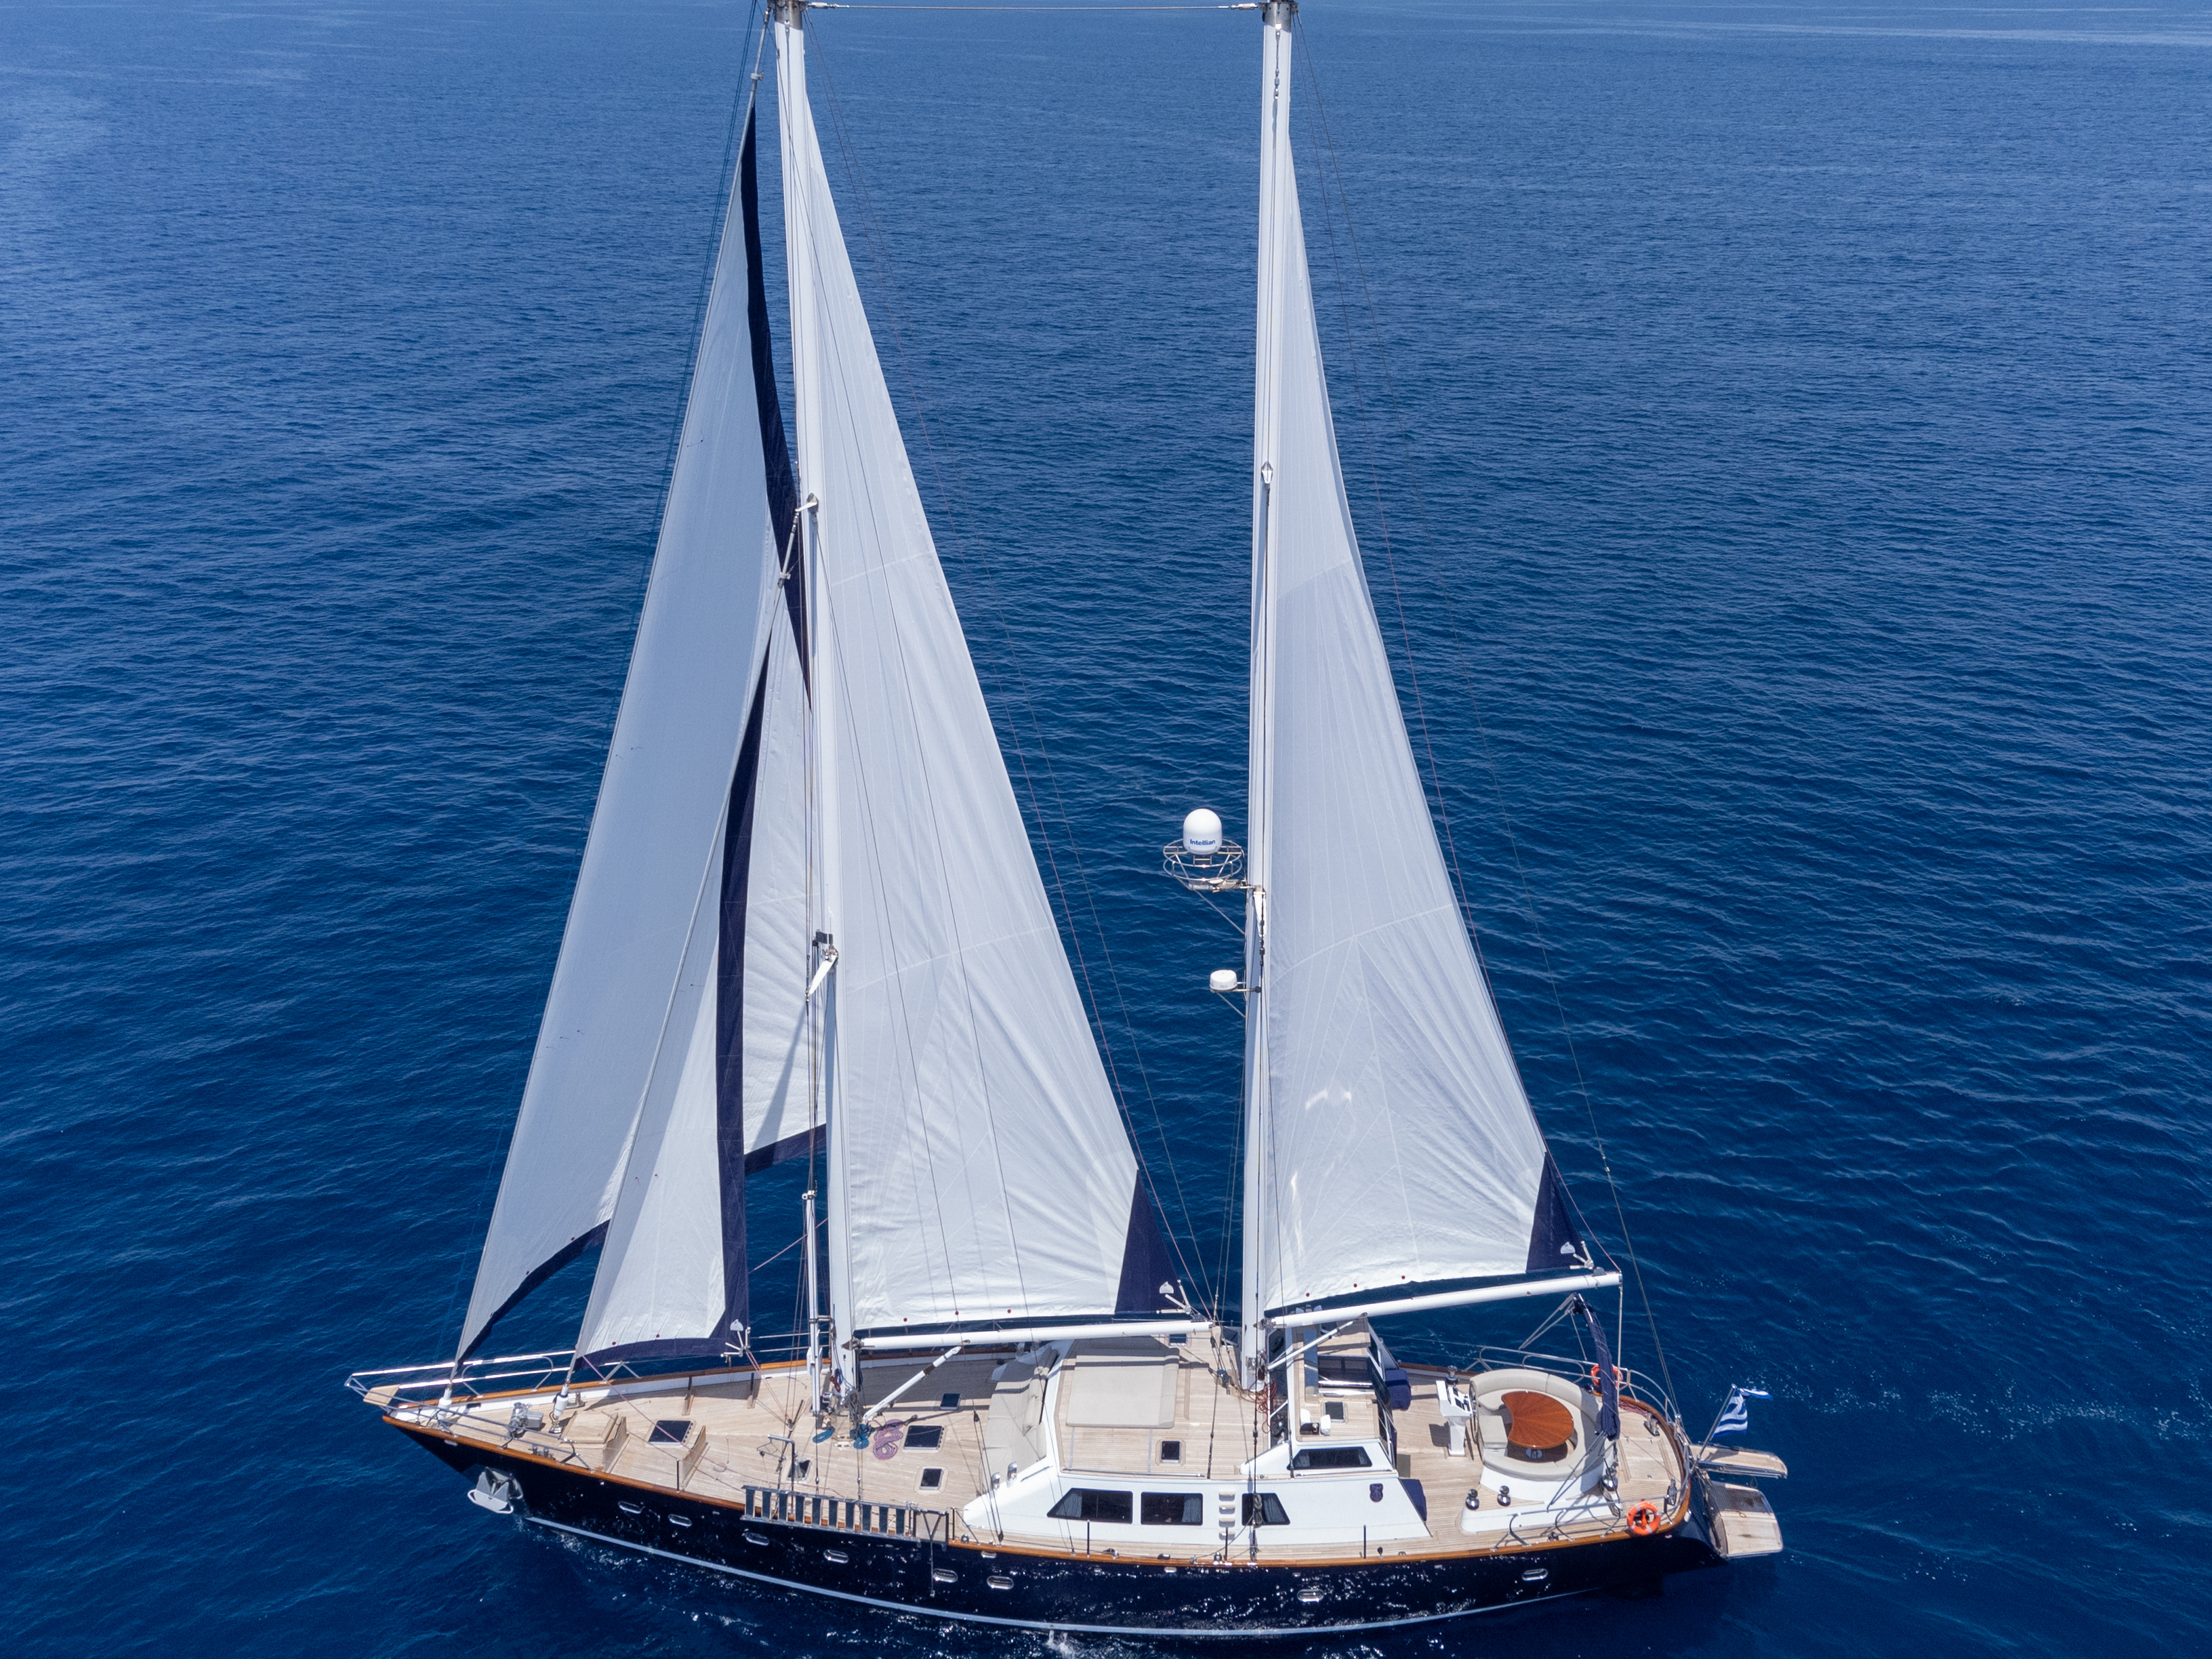 CCYD 85 - Superyacht charter Saint Lucia & Boat hire in Greece Athens and Saronic Gulf Athens Piraeus Marina Zea 1